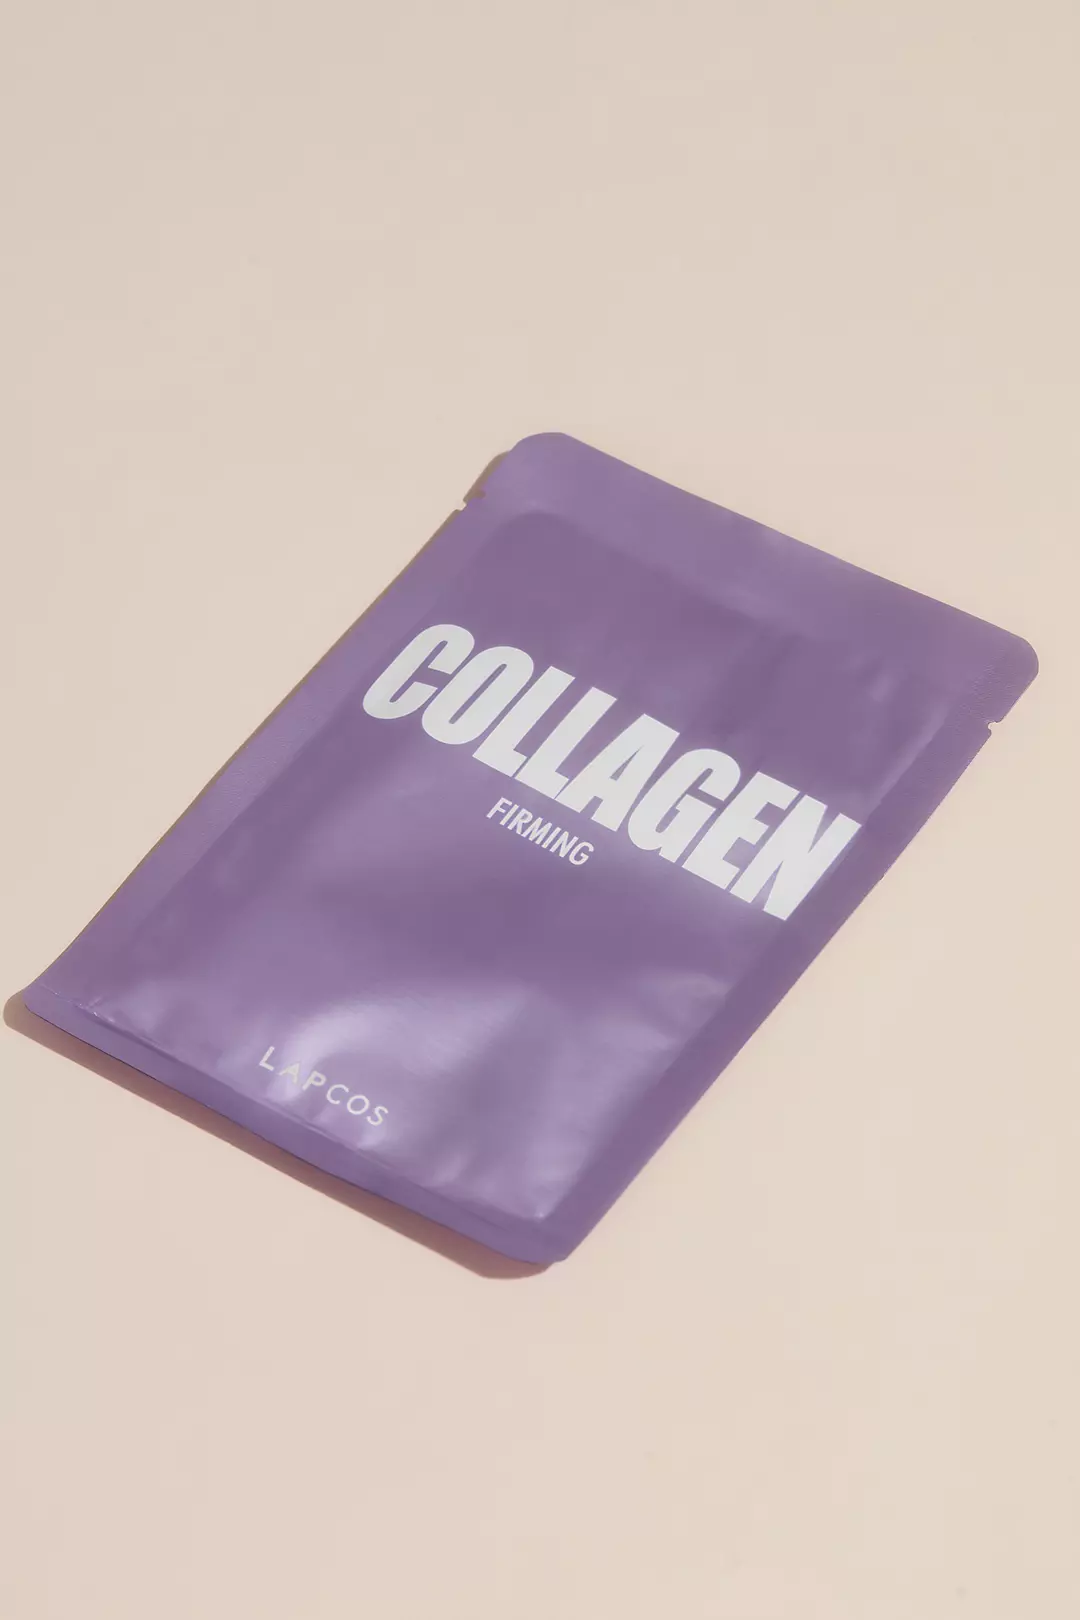 Lapcos Daily Collagen Firming Sheet Mask Image